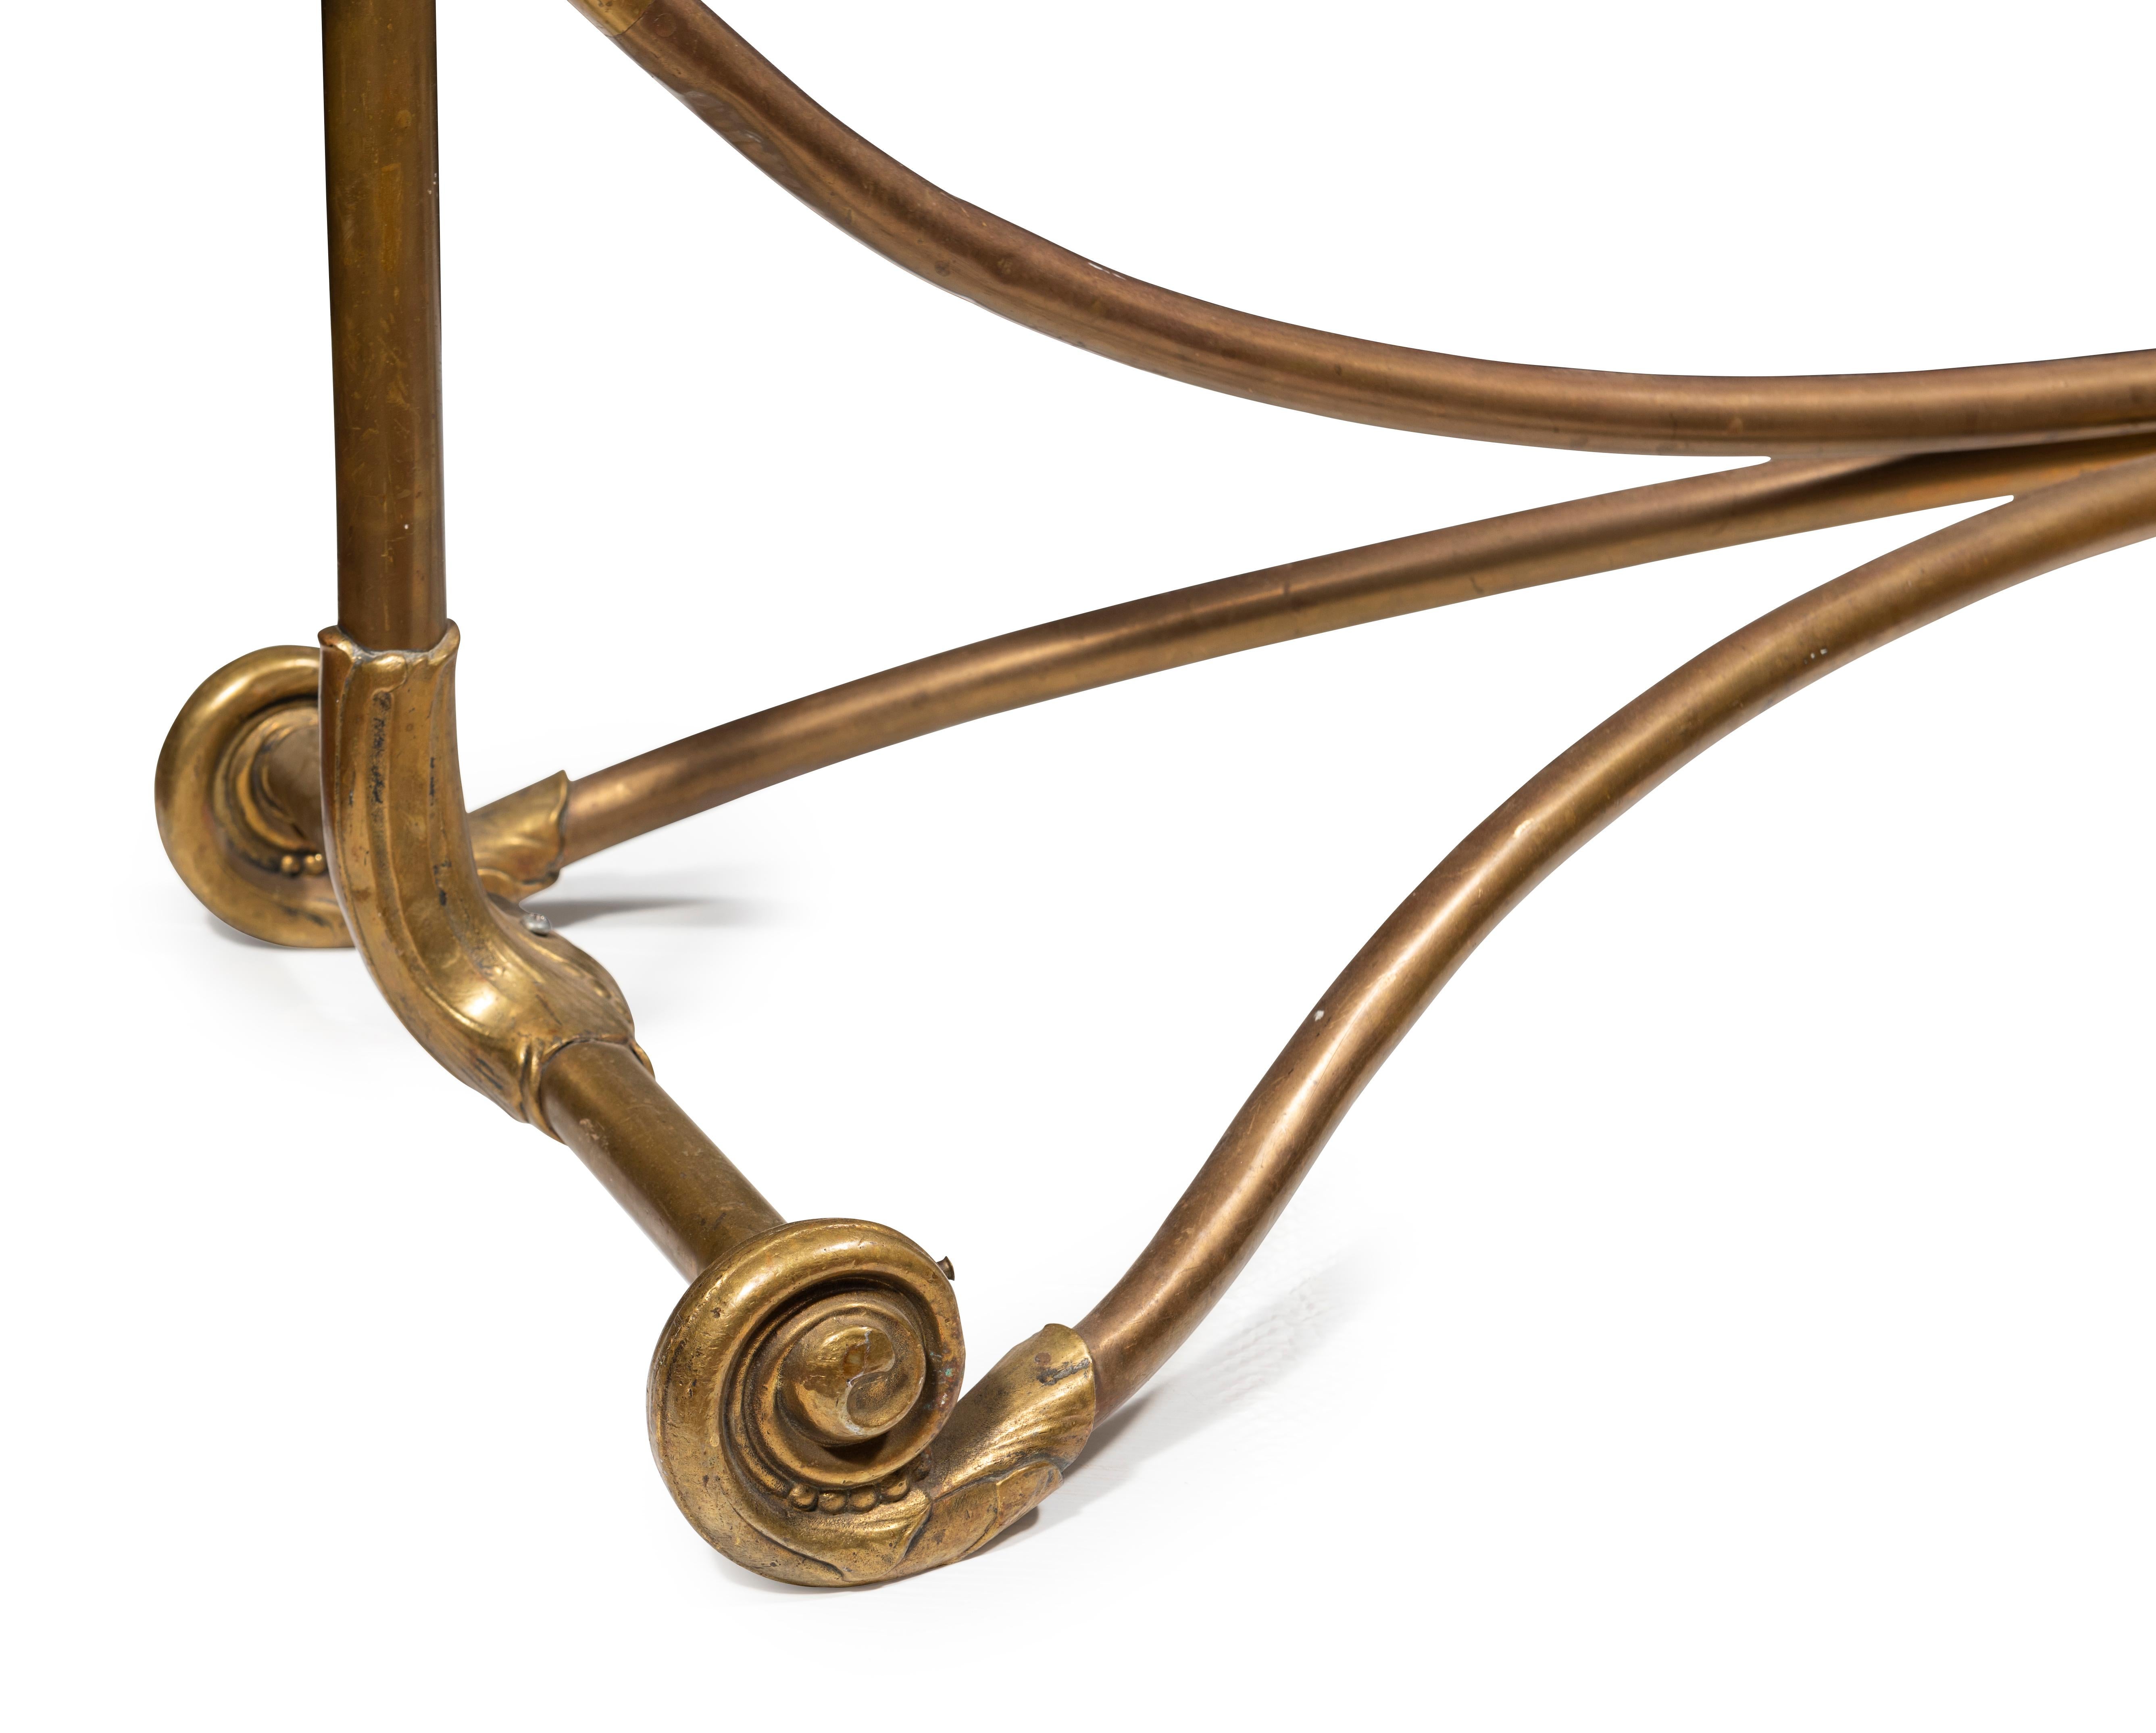 The curved rails with lily and leaf molding, the bottom rail centred with cartouche impressed with the name BOKA.